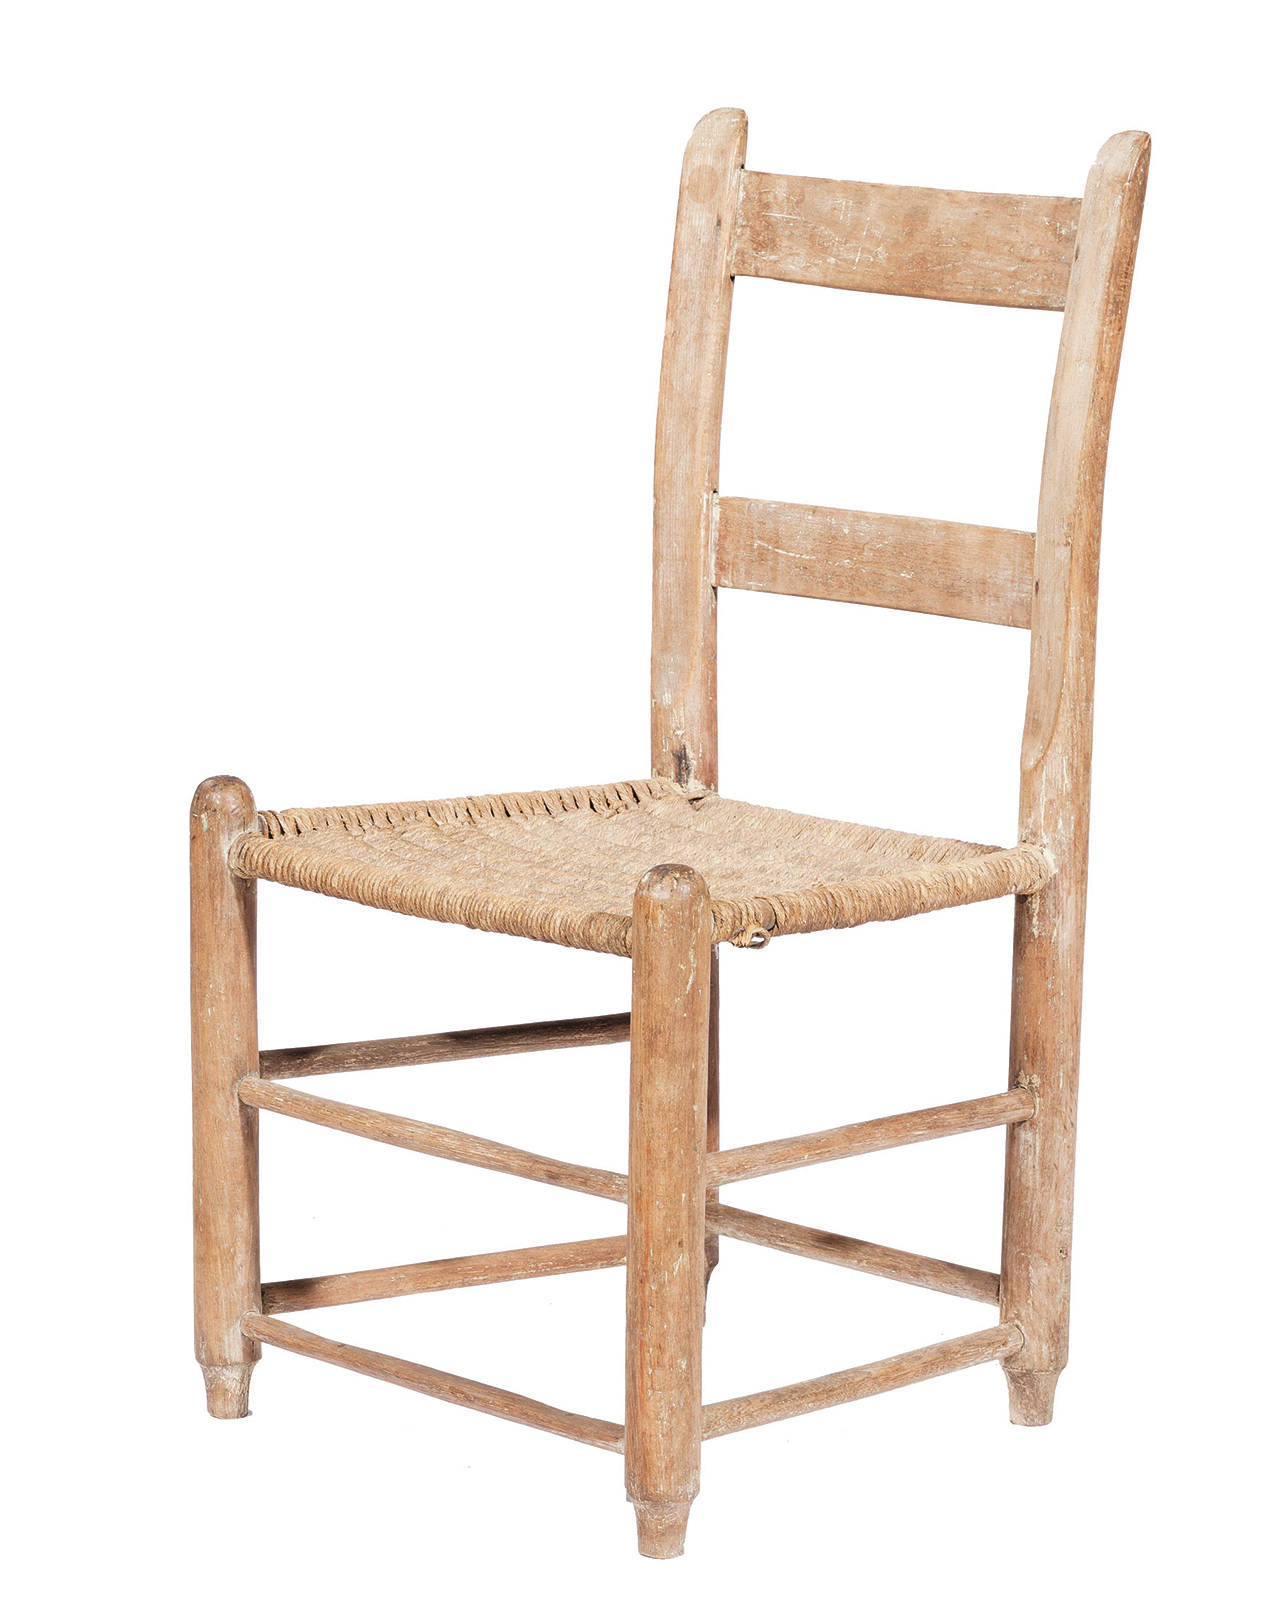 This chair is made of a local wood, cypress, and local material for the seat by a Louisiana craftsman who sold inexpensive handmade furniture in the early 1800s. It sold for $427 in a recent sale of Louisiana antiques by Neal Auctions. (Cowles Syndicate Inc.)